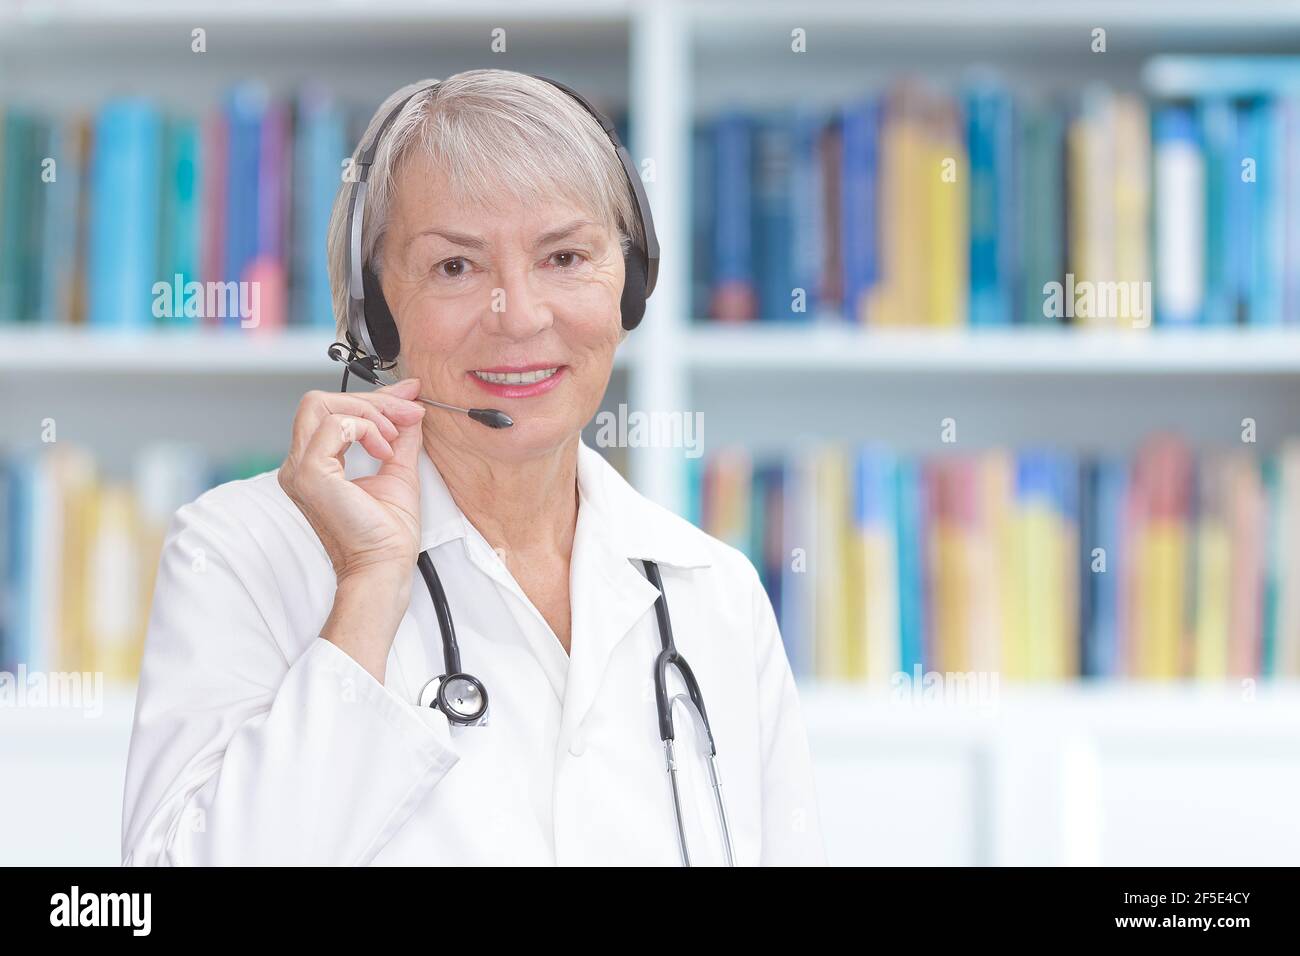 Webcam view of a doctor with headset during a video consultation, telemedicine or telehealth concept. Stock Photo